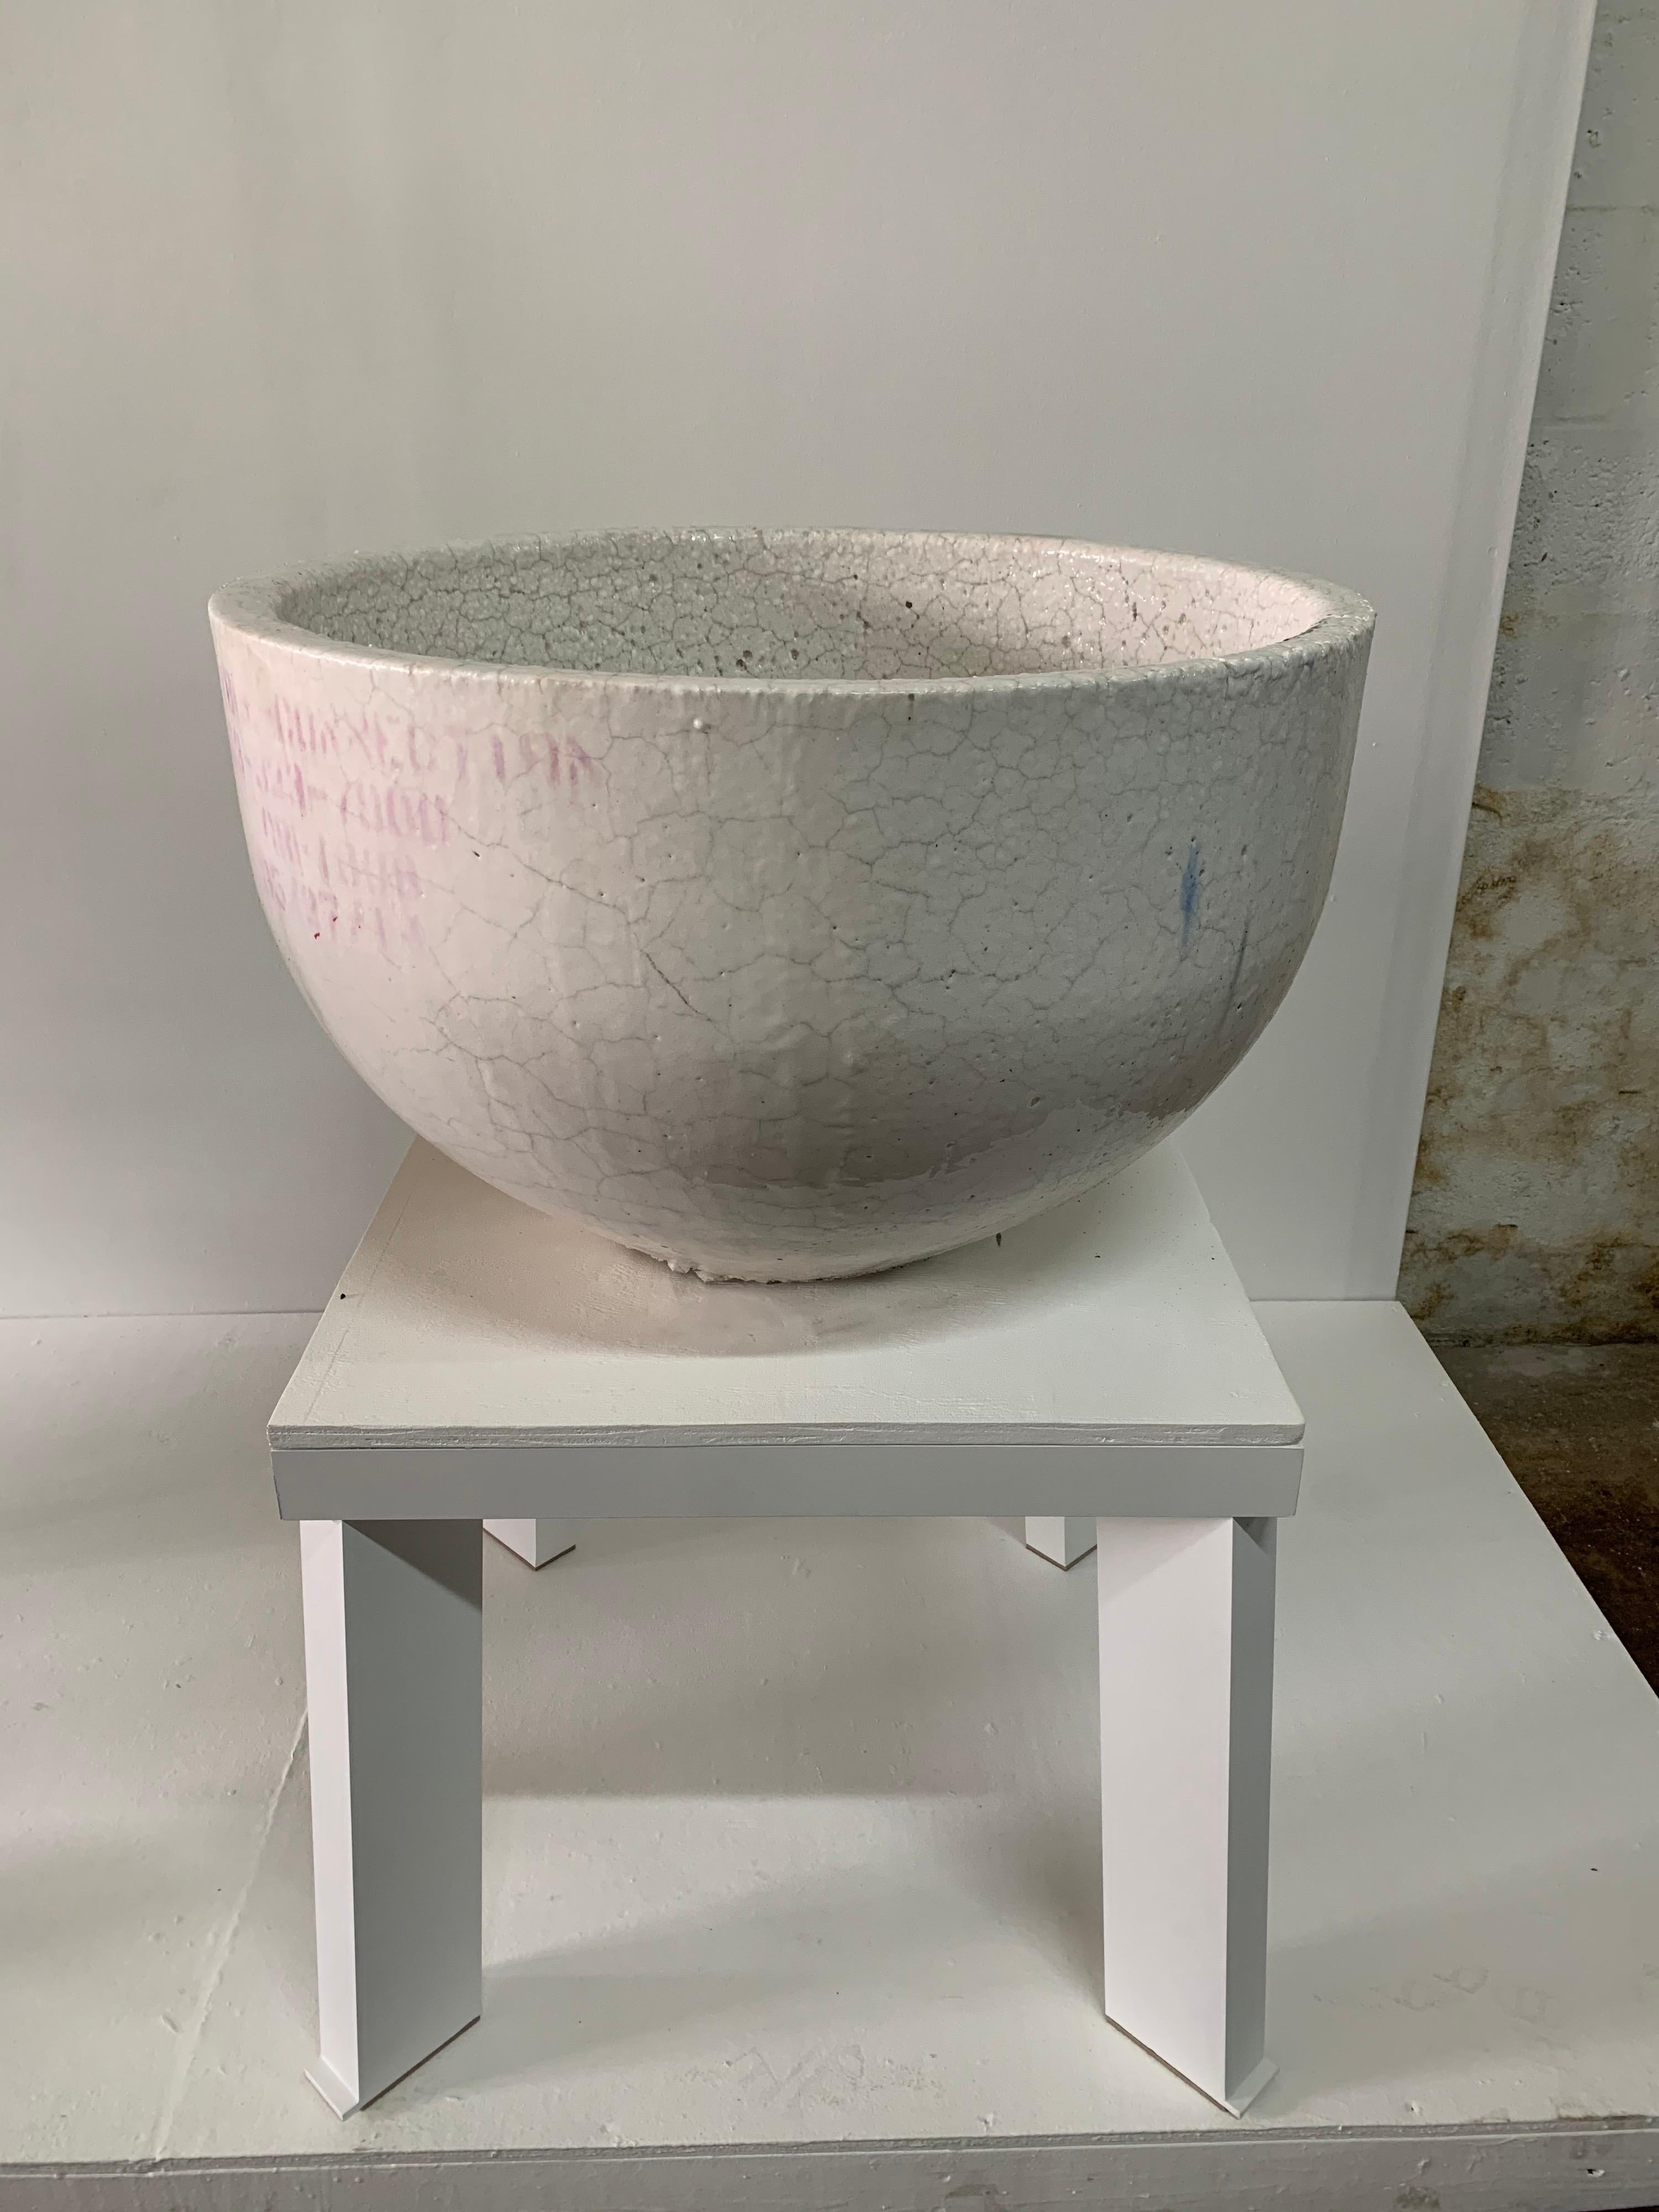 This amazing and large ceramic crucible that was used for industrial glass blowing and now used in high end decoration as Art vessels or orchid planters. It shows the residue at bottom (glass that remains in crystallized form) - each one completely